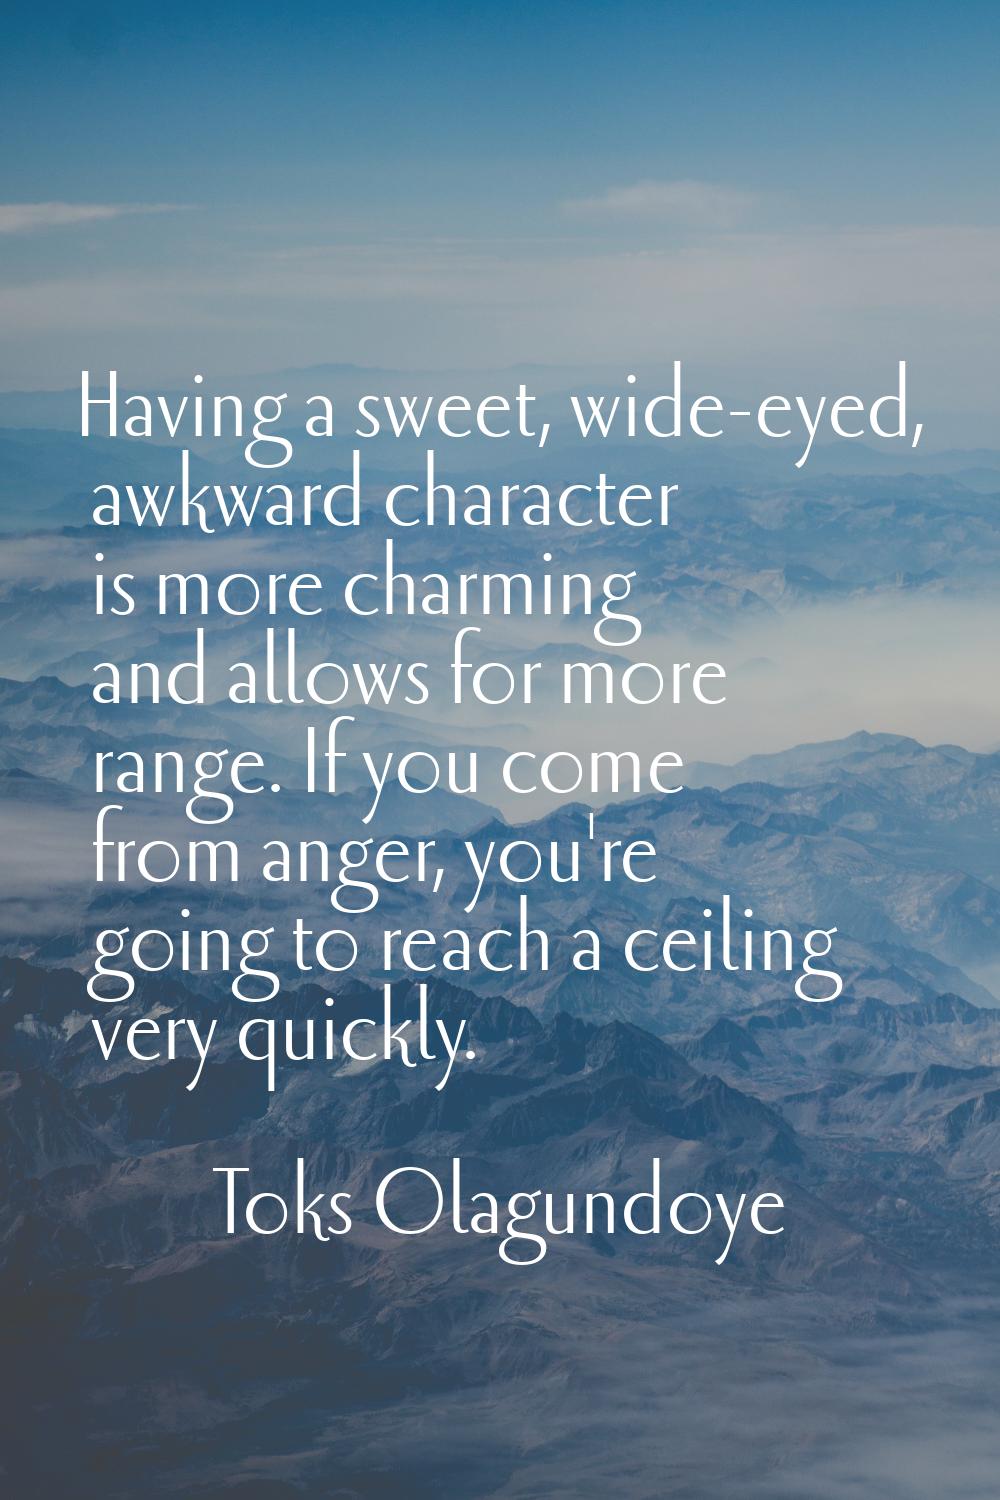 Having a sweet, wide-eyed, awkward character is more charming and allows for more range. If you com